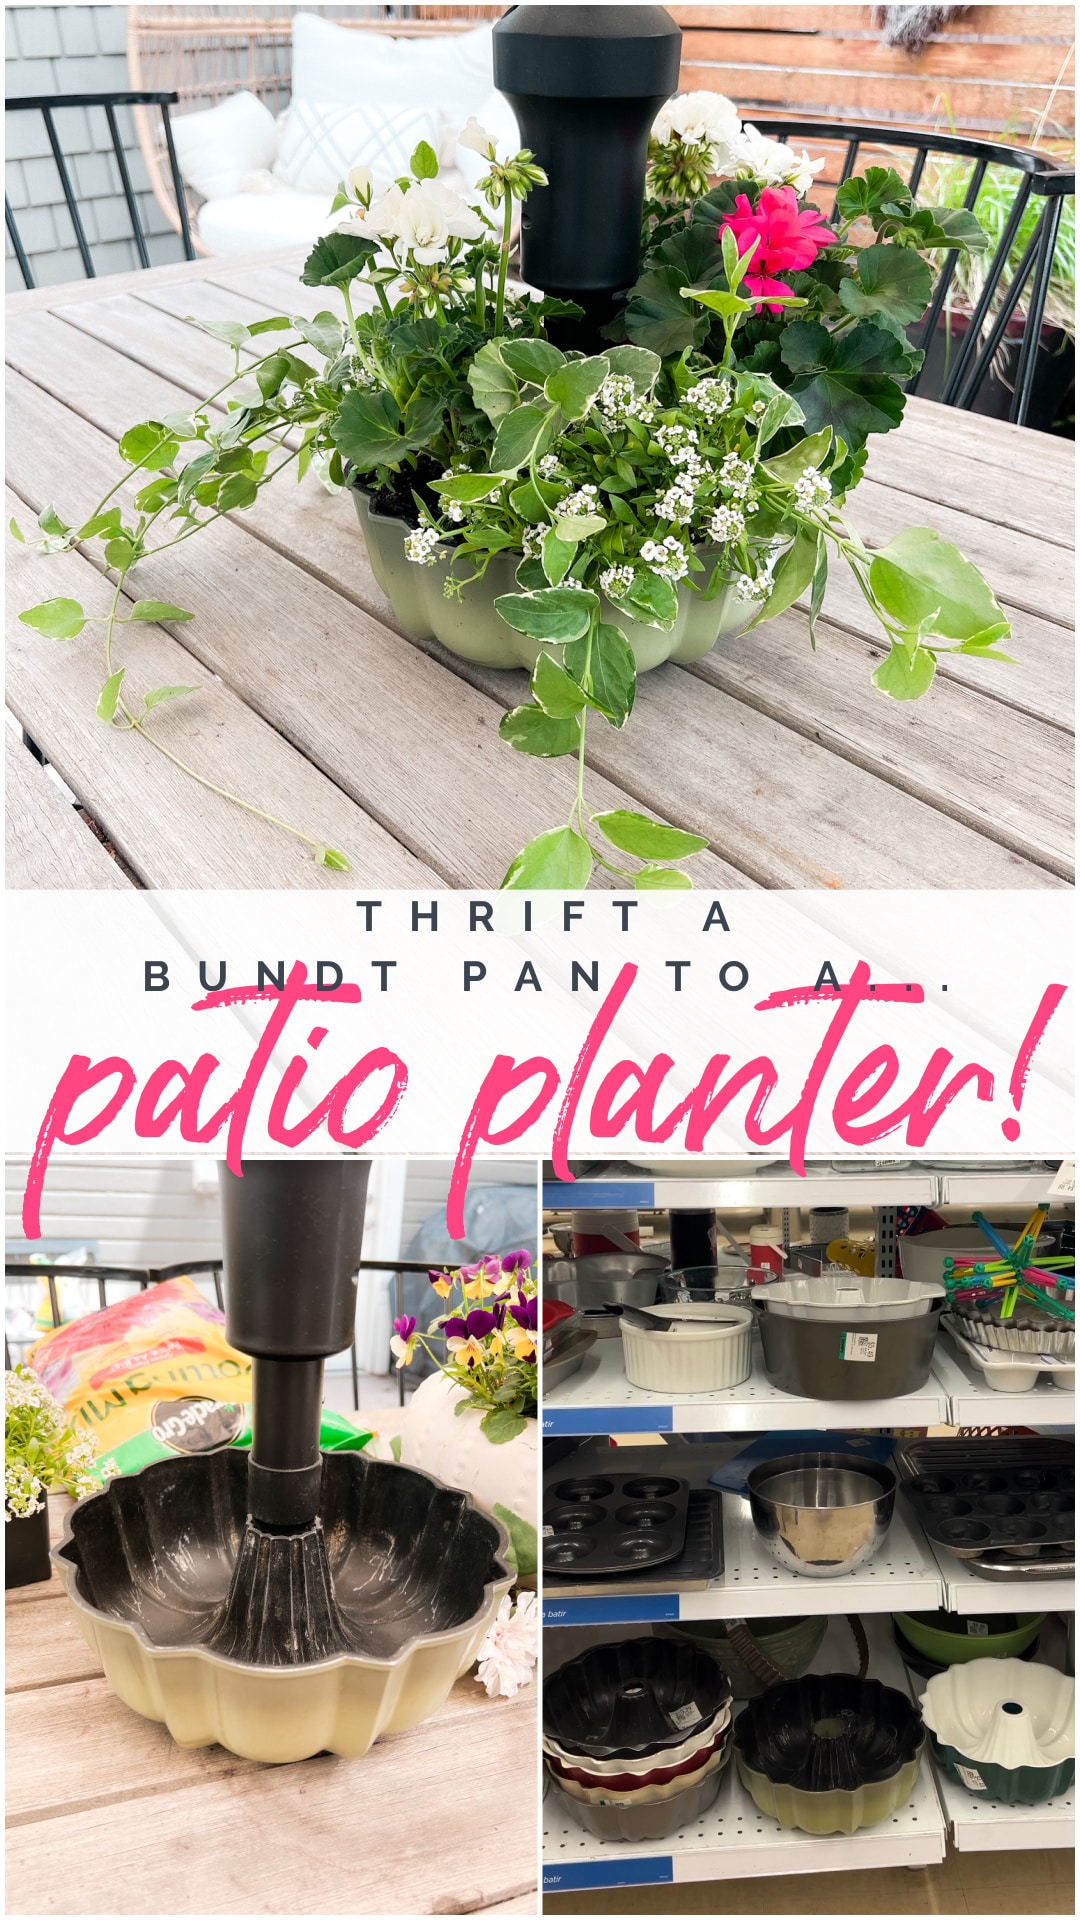 Thrifted Bundt Pan to Patio Planter. Upcycle a thrifted bundt pan into a pretty planter for your patio.